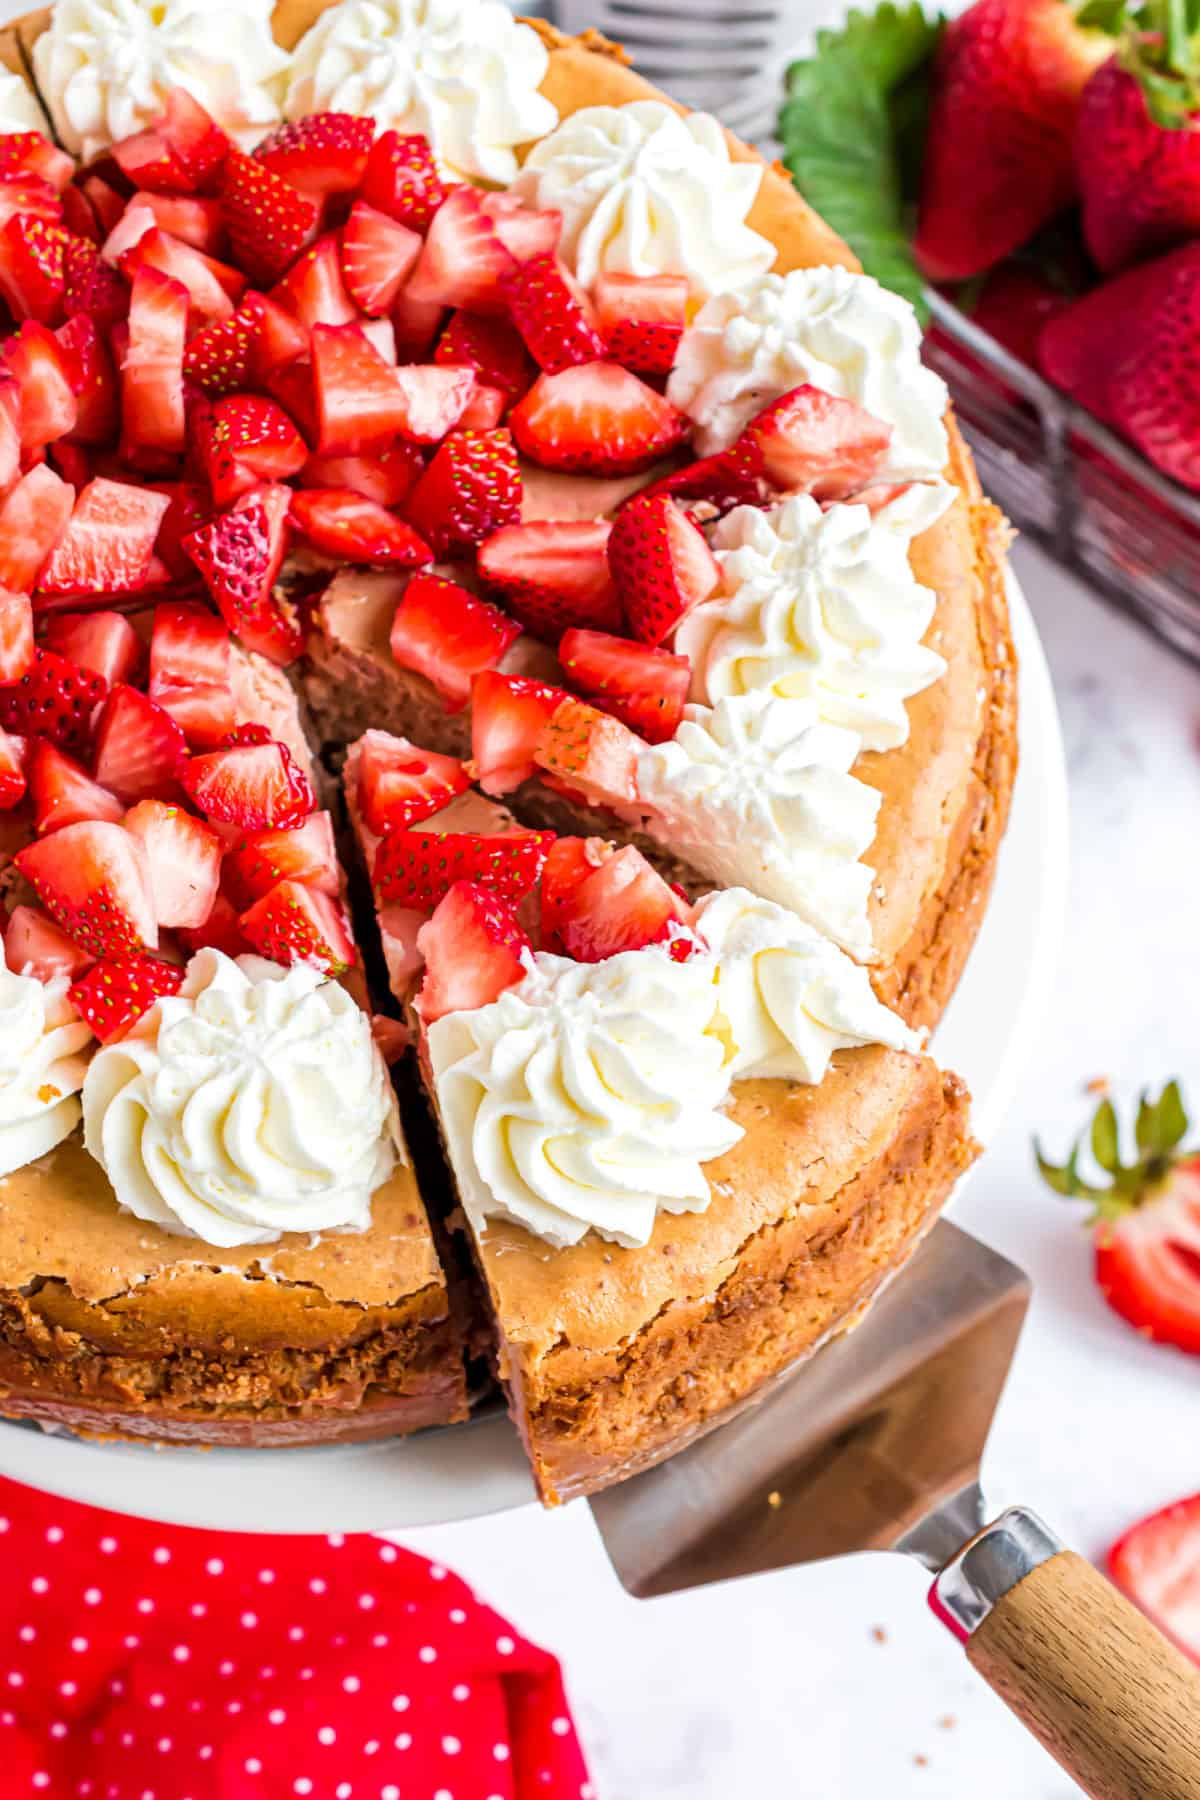 Strawberry cheesecake topped with fresh berries and whipped cream with a slice being removed.